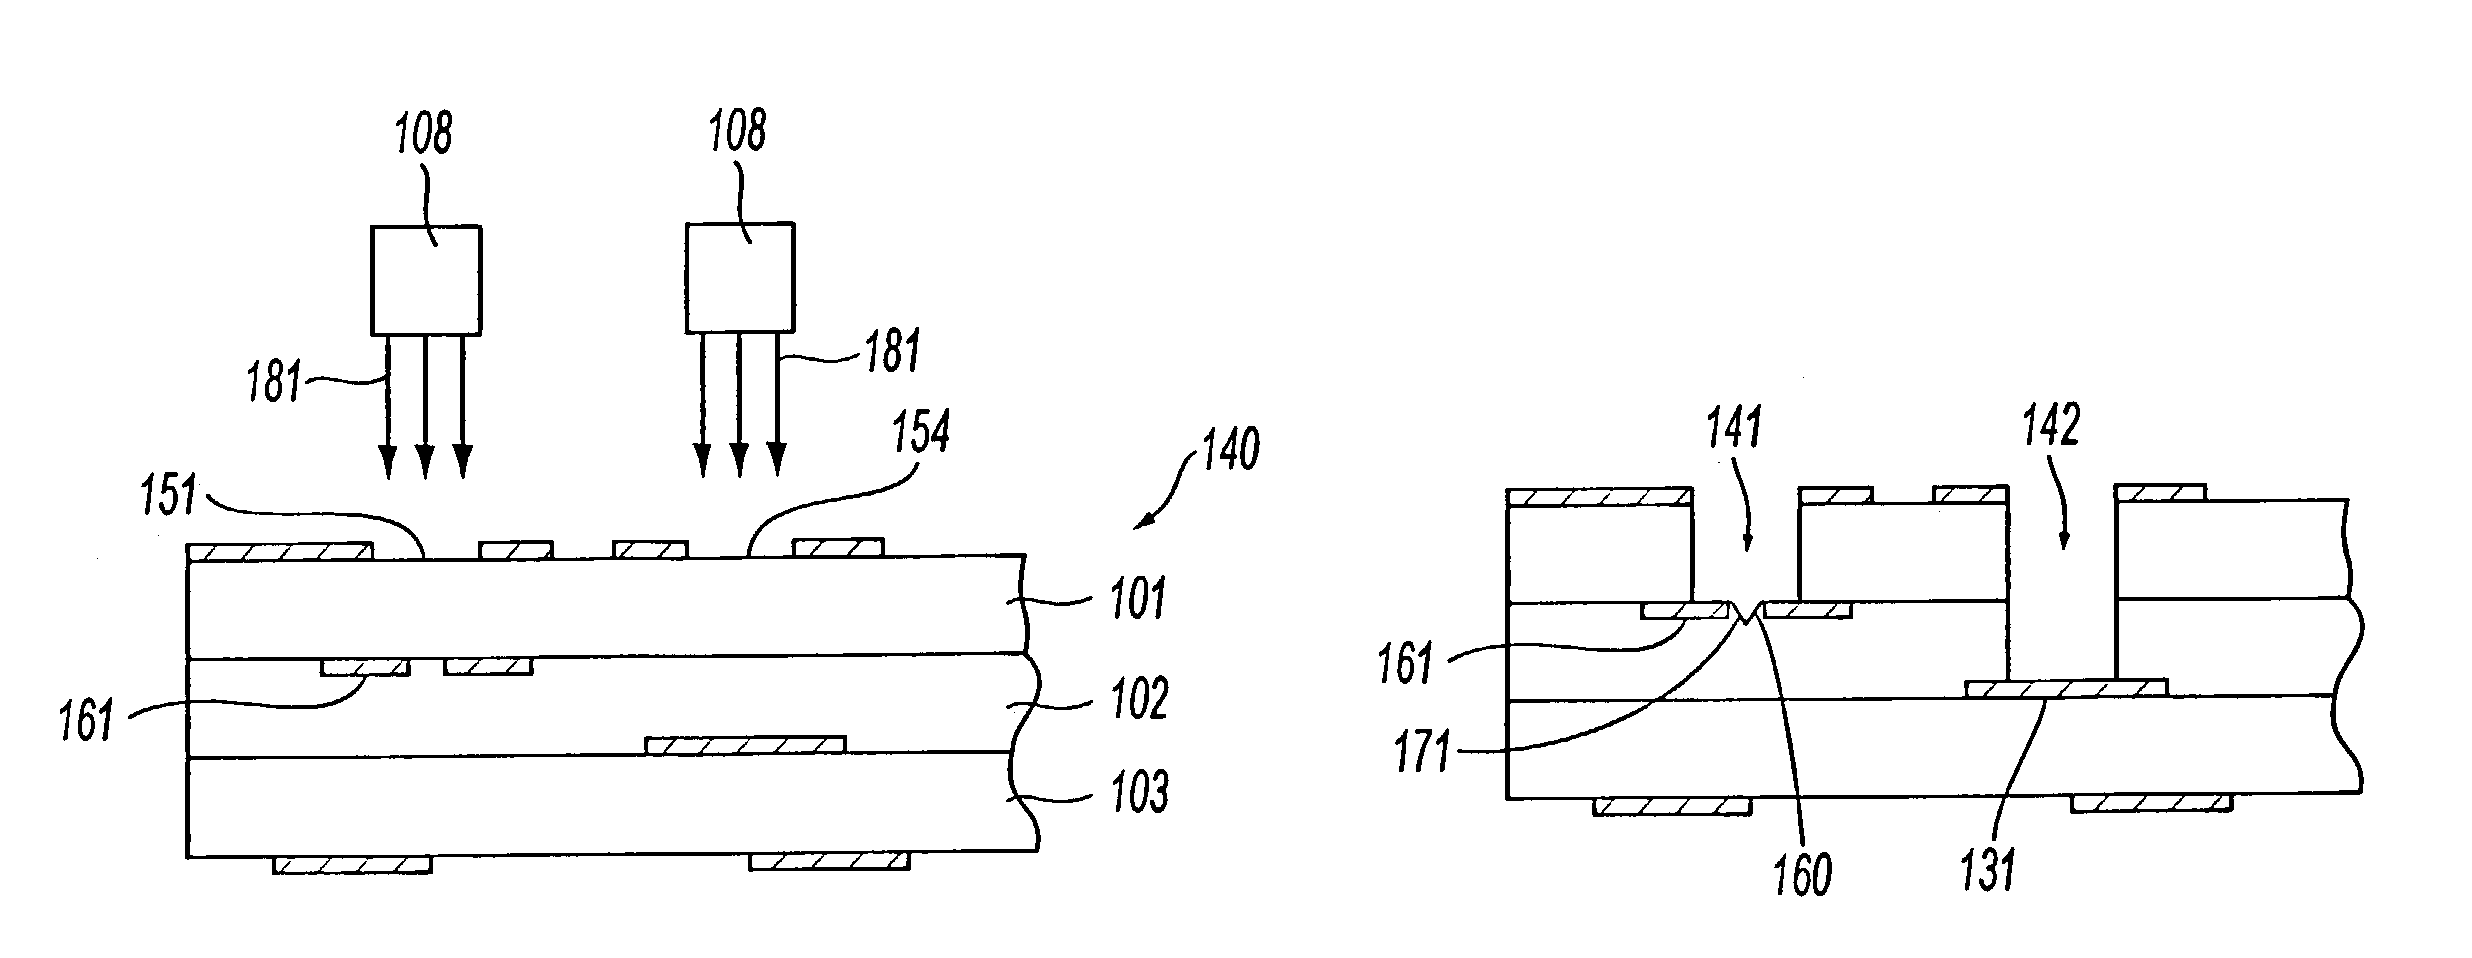 Method of manufacturing a printed wiring board having a previously formed opening hole in an innerlayer conductor circuit